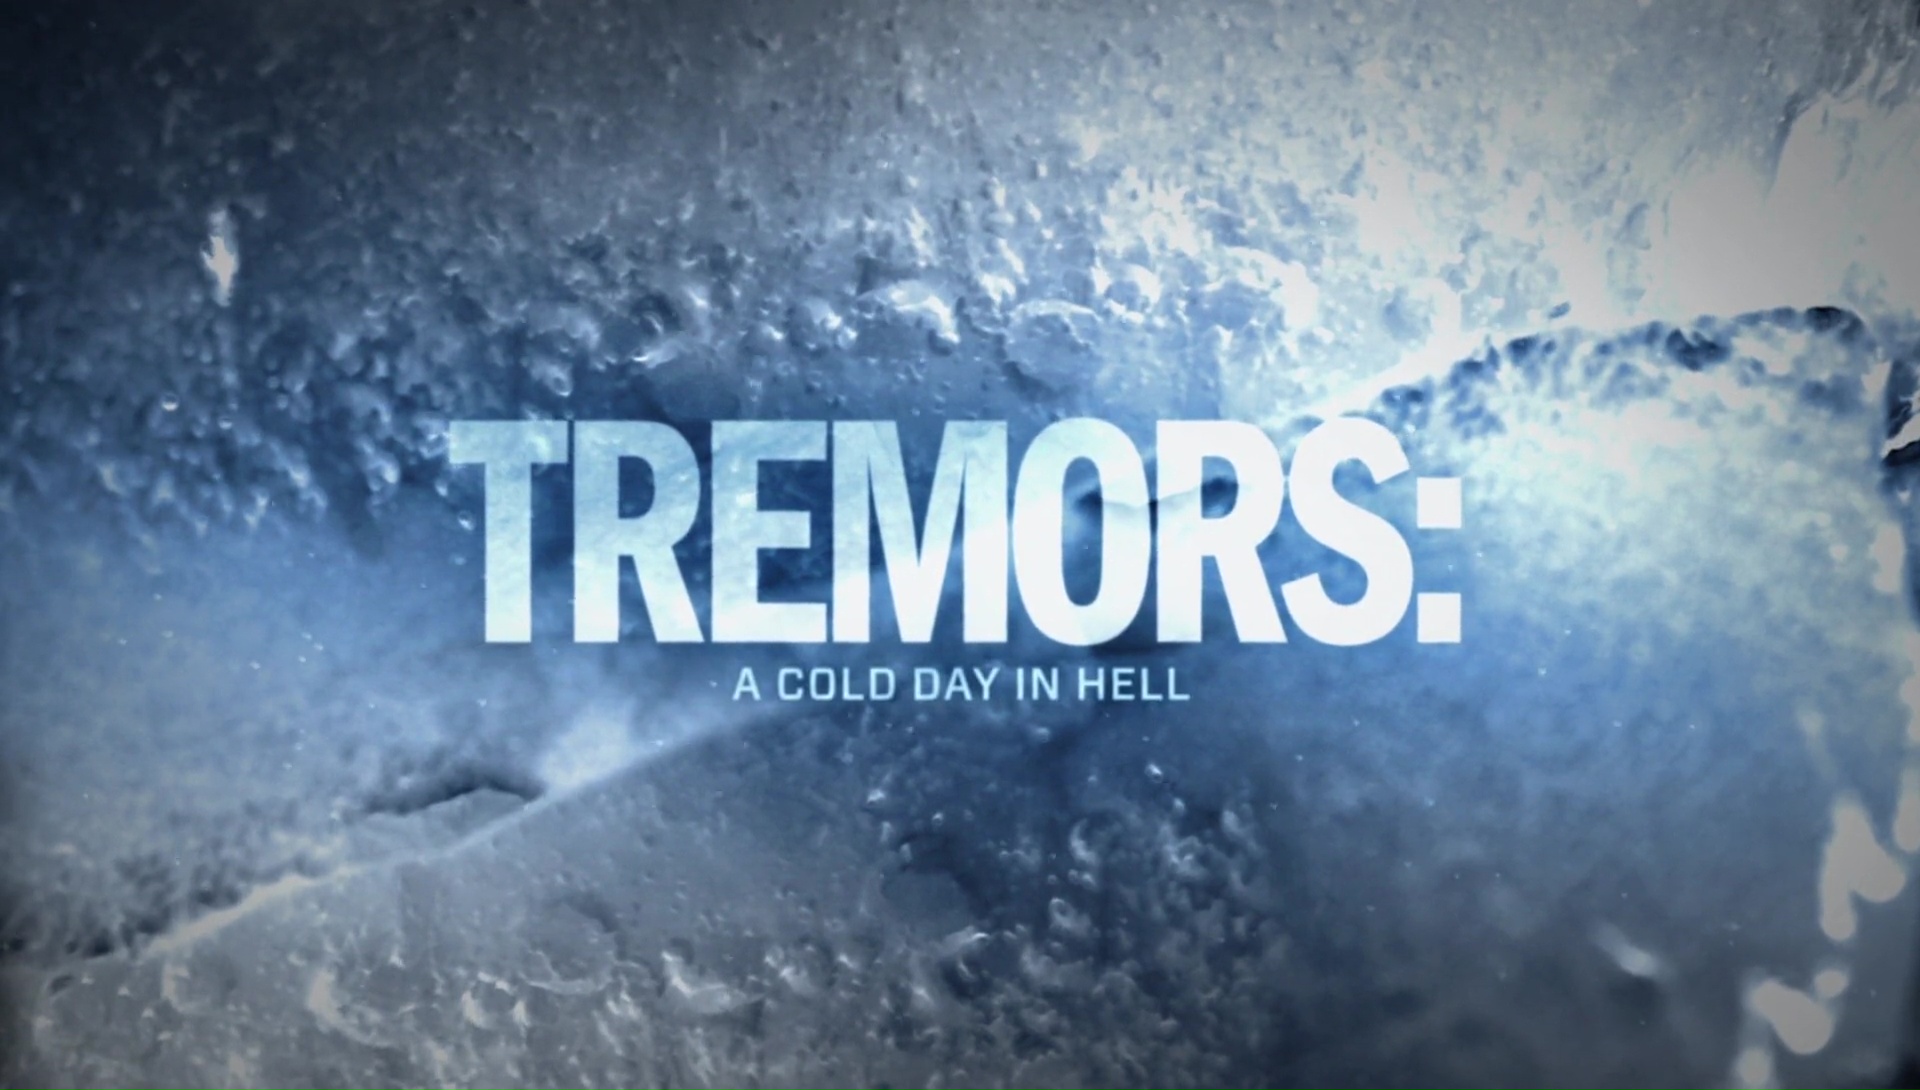 TREMORS: A COLD DAY IN HELL de Don Michael Paul (2018)